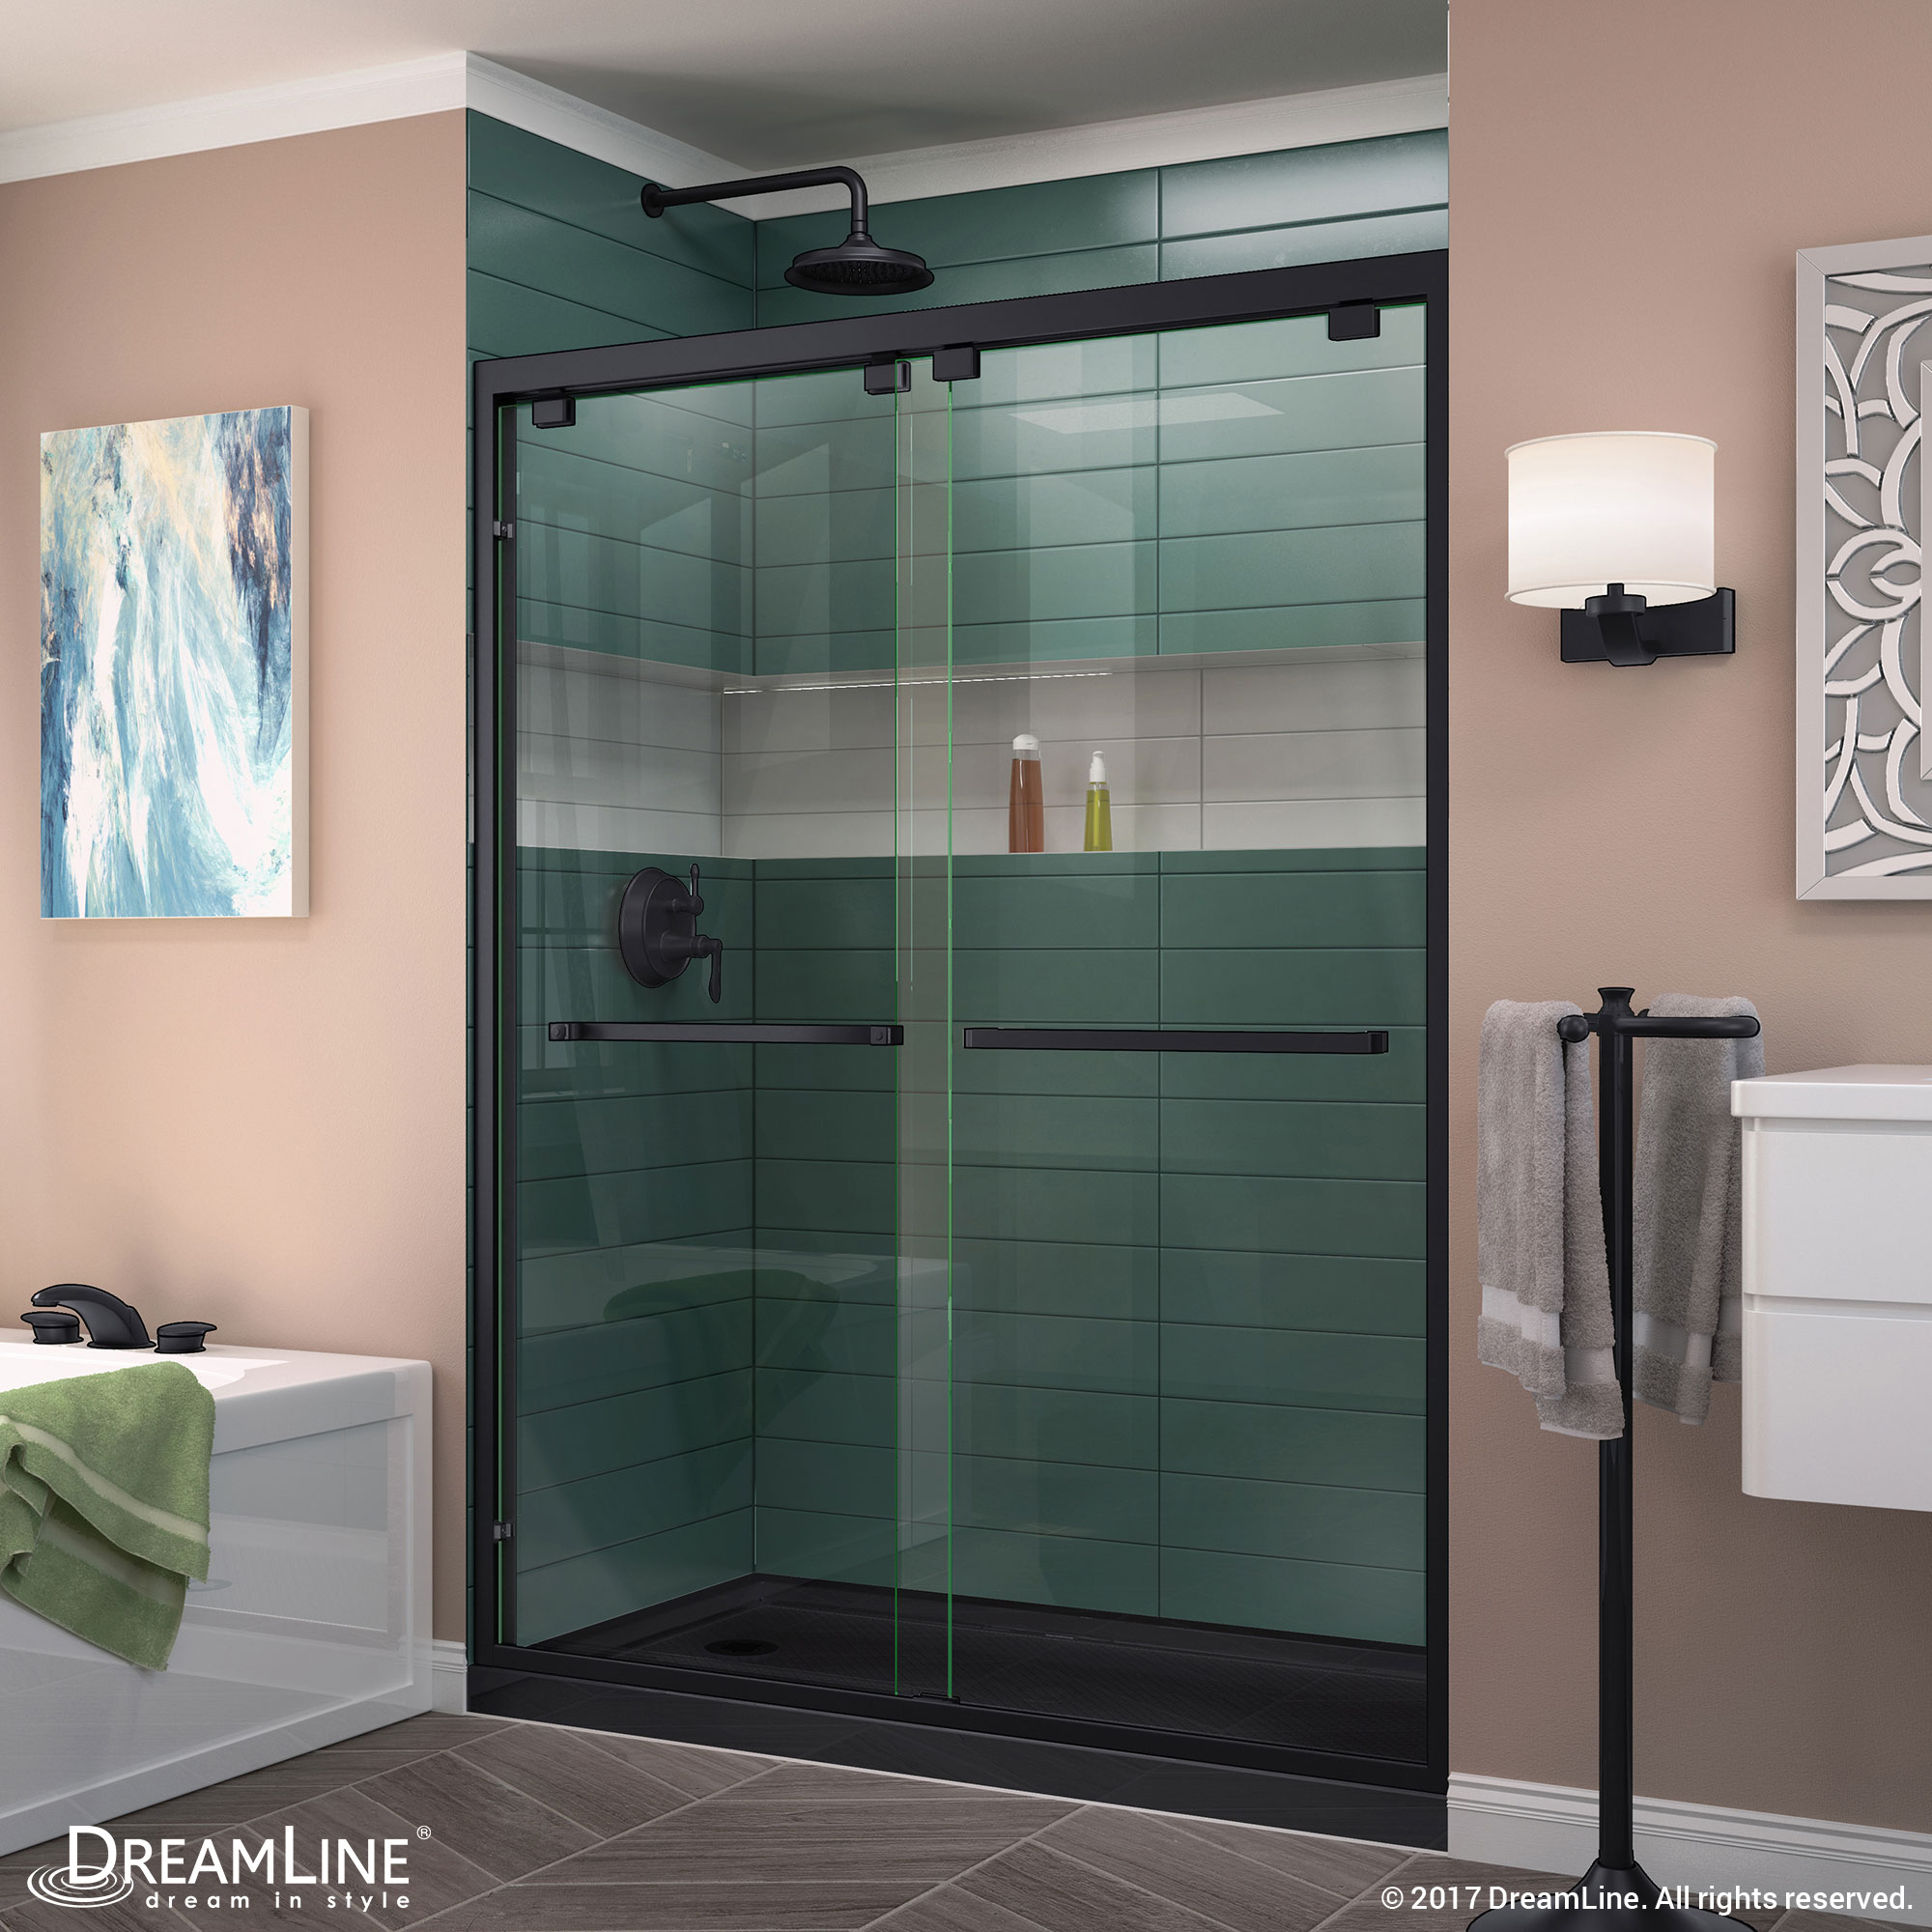 DreamLine Encore 36 in. D x 60 in. W x 78 3/4 in. H Bypass Shower Door in Chrome and Left Drain Black Base Kit